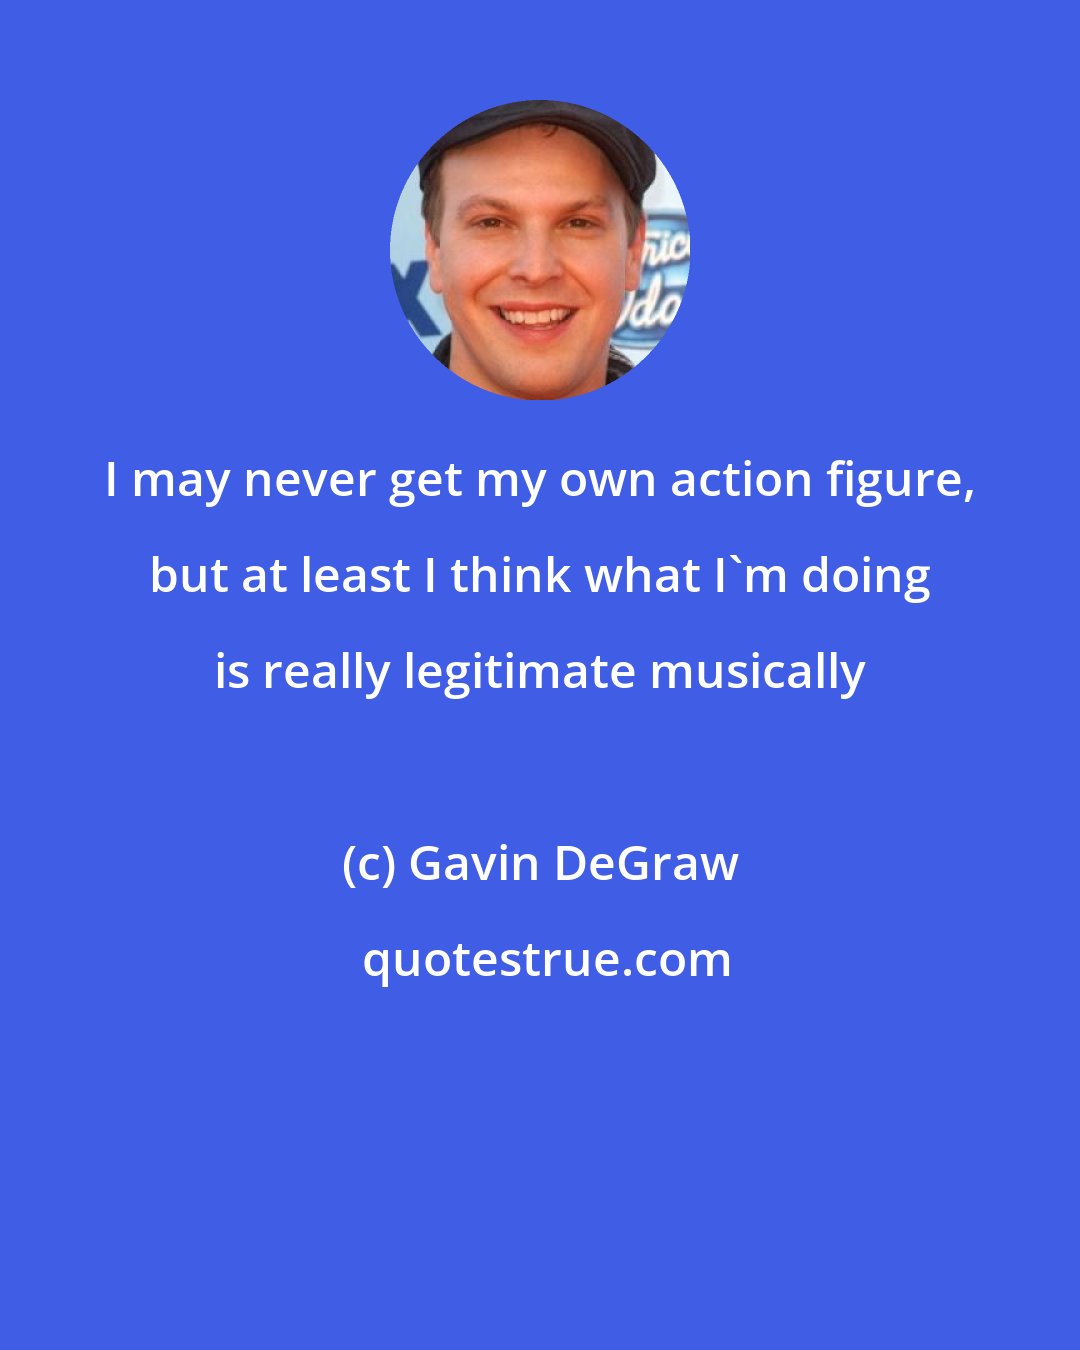 Gavin DeGraw: I may never get my own action figure, but at least I think what I'm doing is really legitimate musically